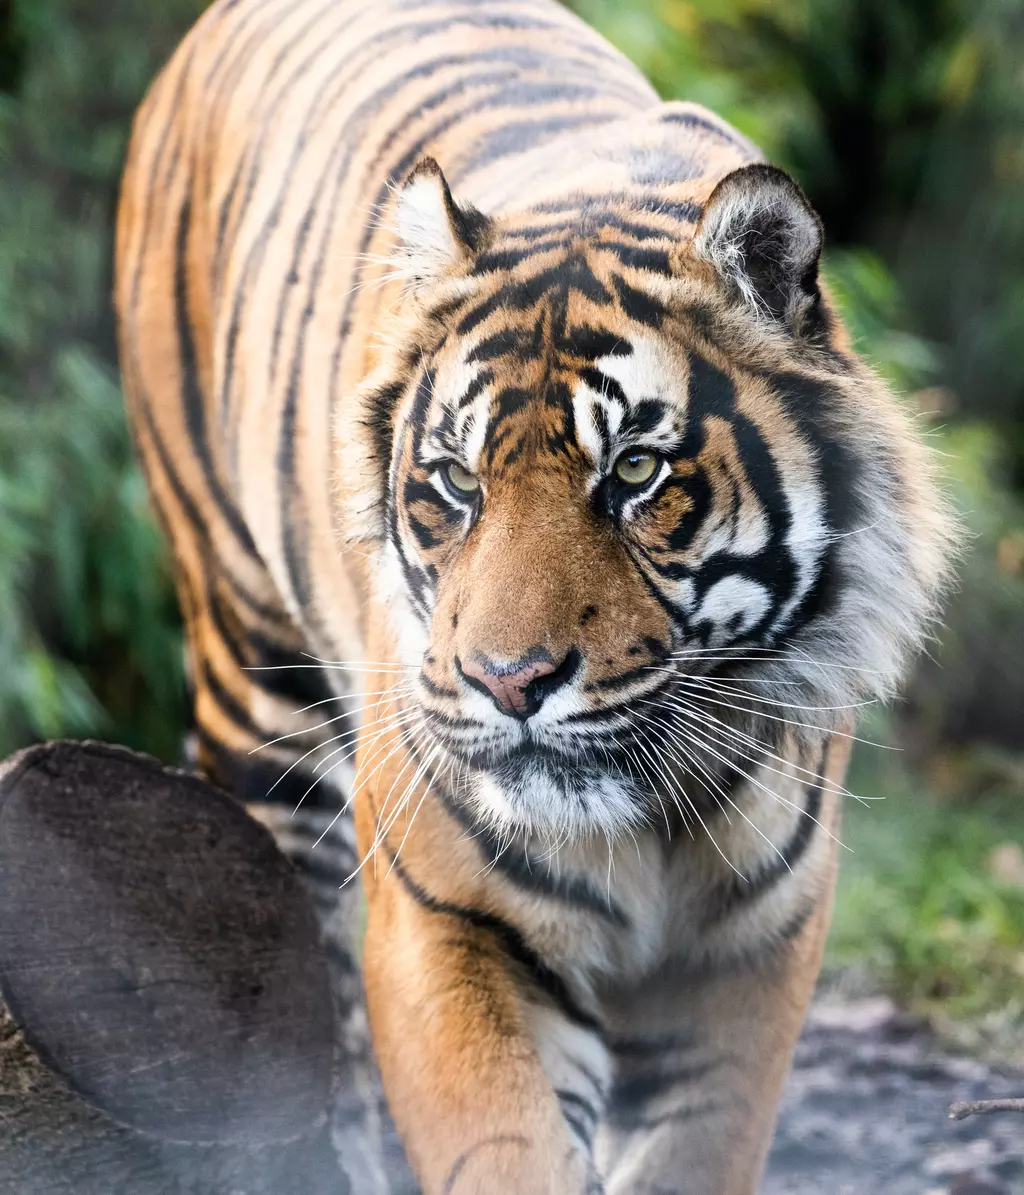 Reconnecting and rehabilitating tiger territories | ZSL